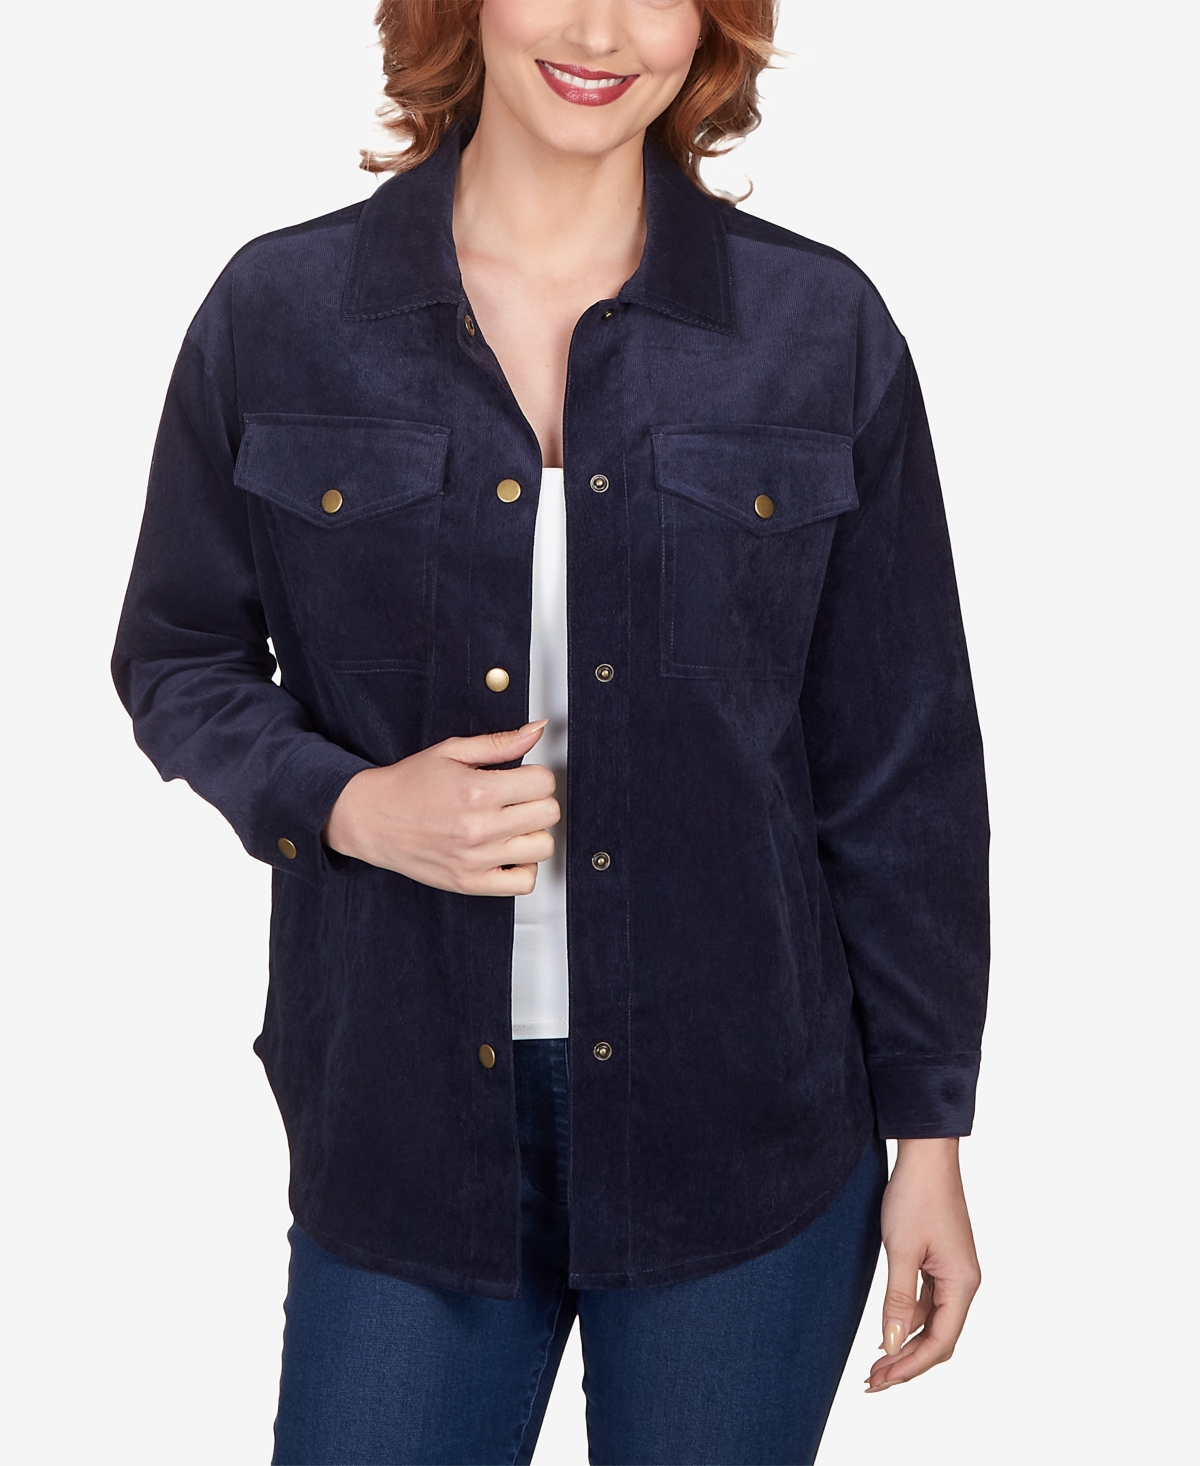 Petite Button Up Solid Corduroy Shacket - Berry